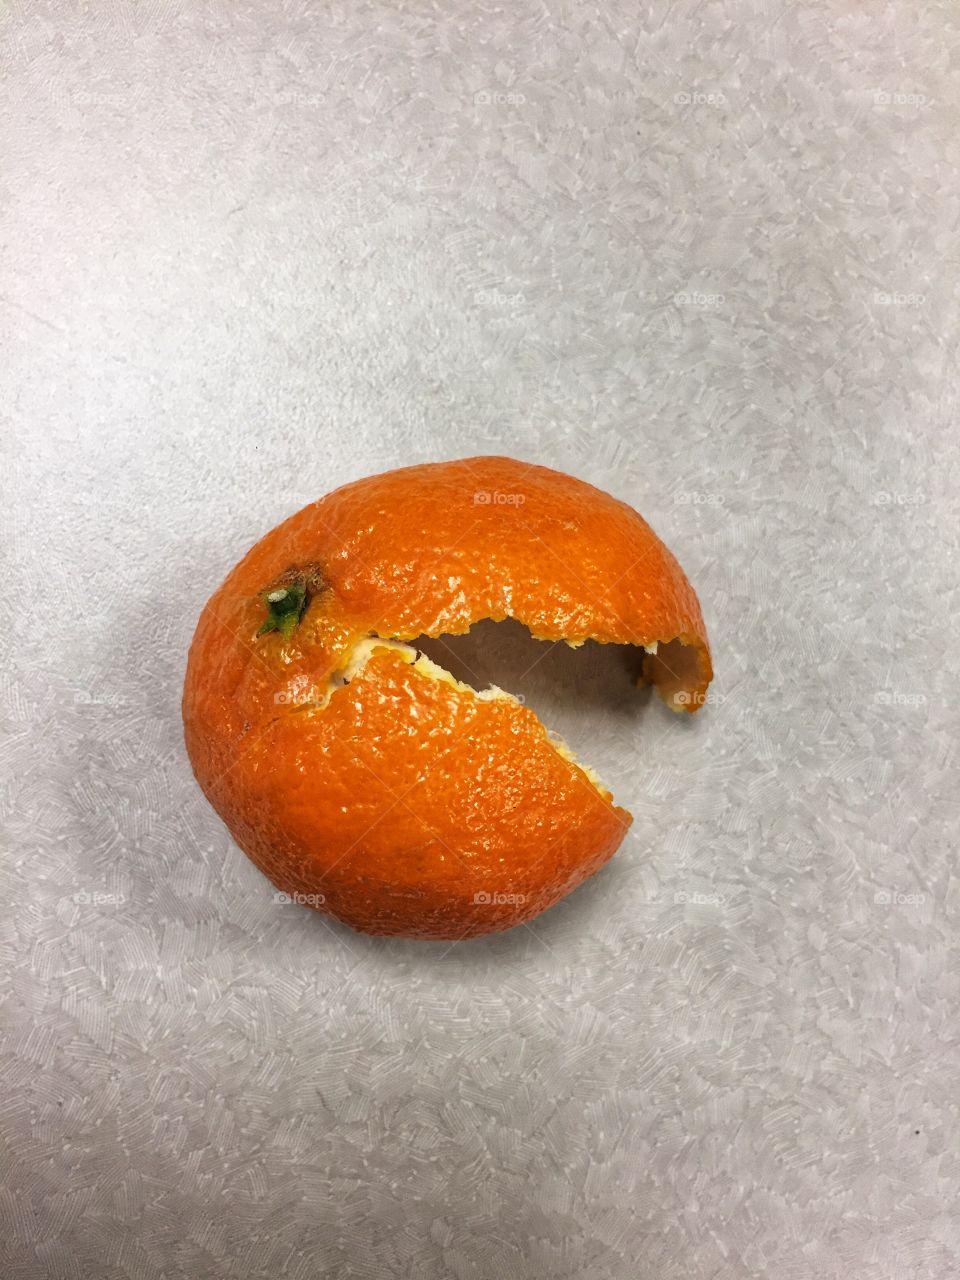 An orange peel sits discarded on a grey tabletop. This fruit rind looks a little like Pac Man